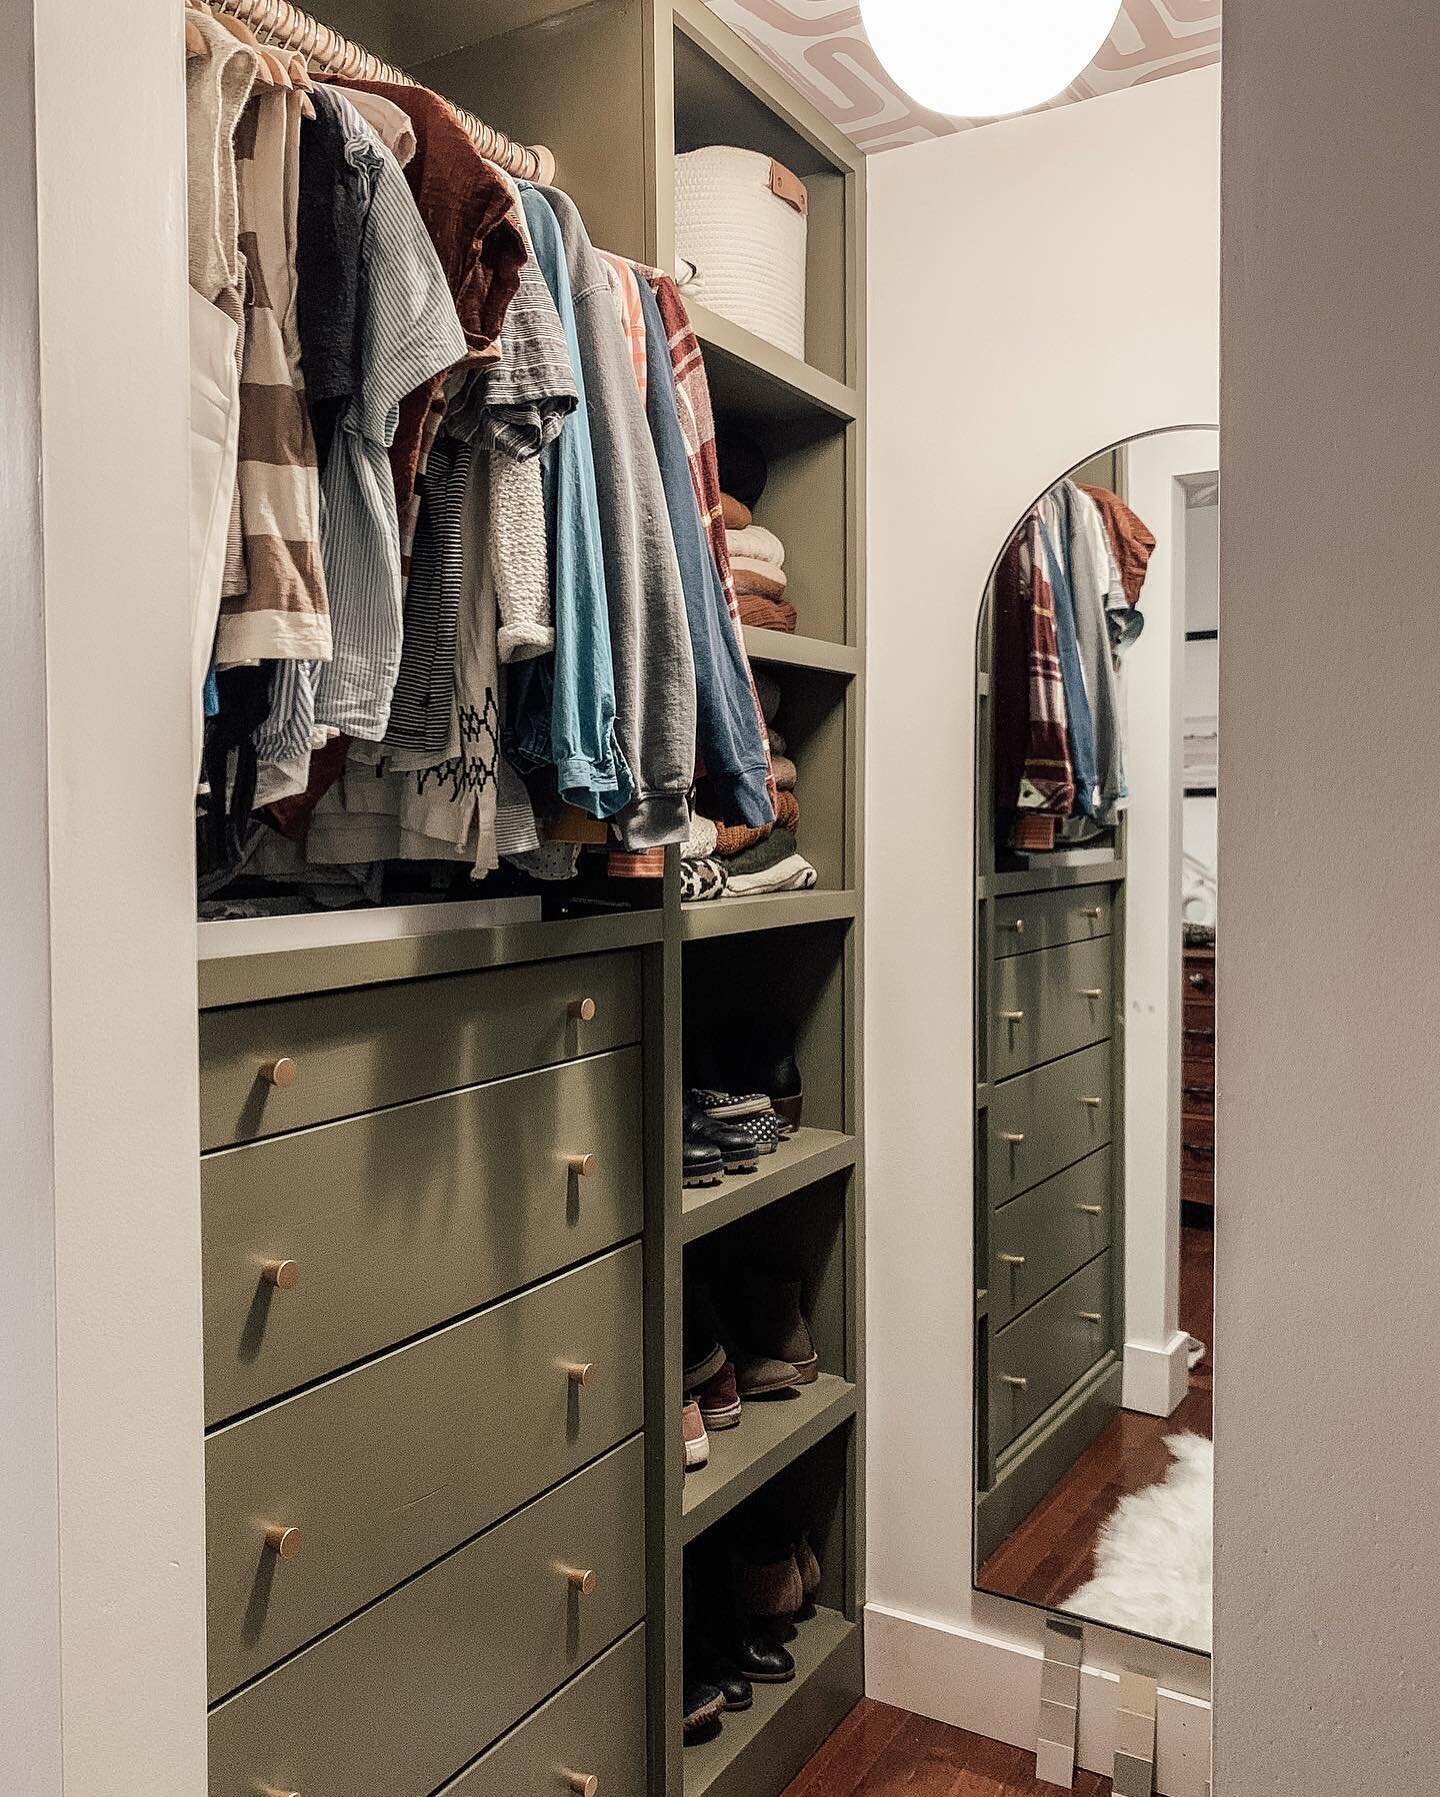 I still can&rsquo;t believe we built this. I really love creative solutions like this. We took an awkward space in our bedroom and built this walk-in closet to solve our storage woes. I don&rsquo;t miss the old cave of a closet ONE BIT and I don&rsqu